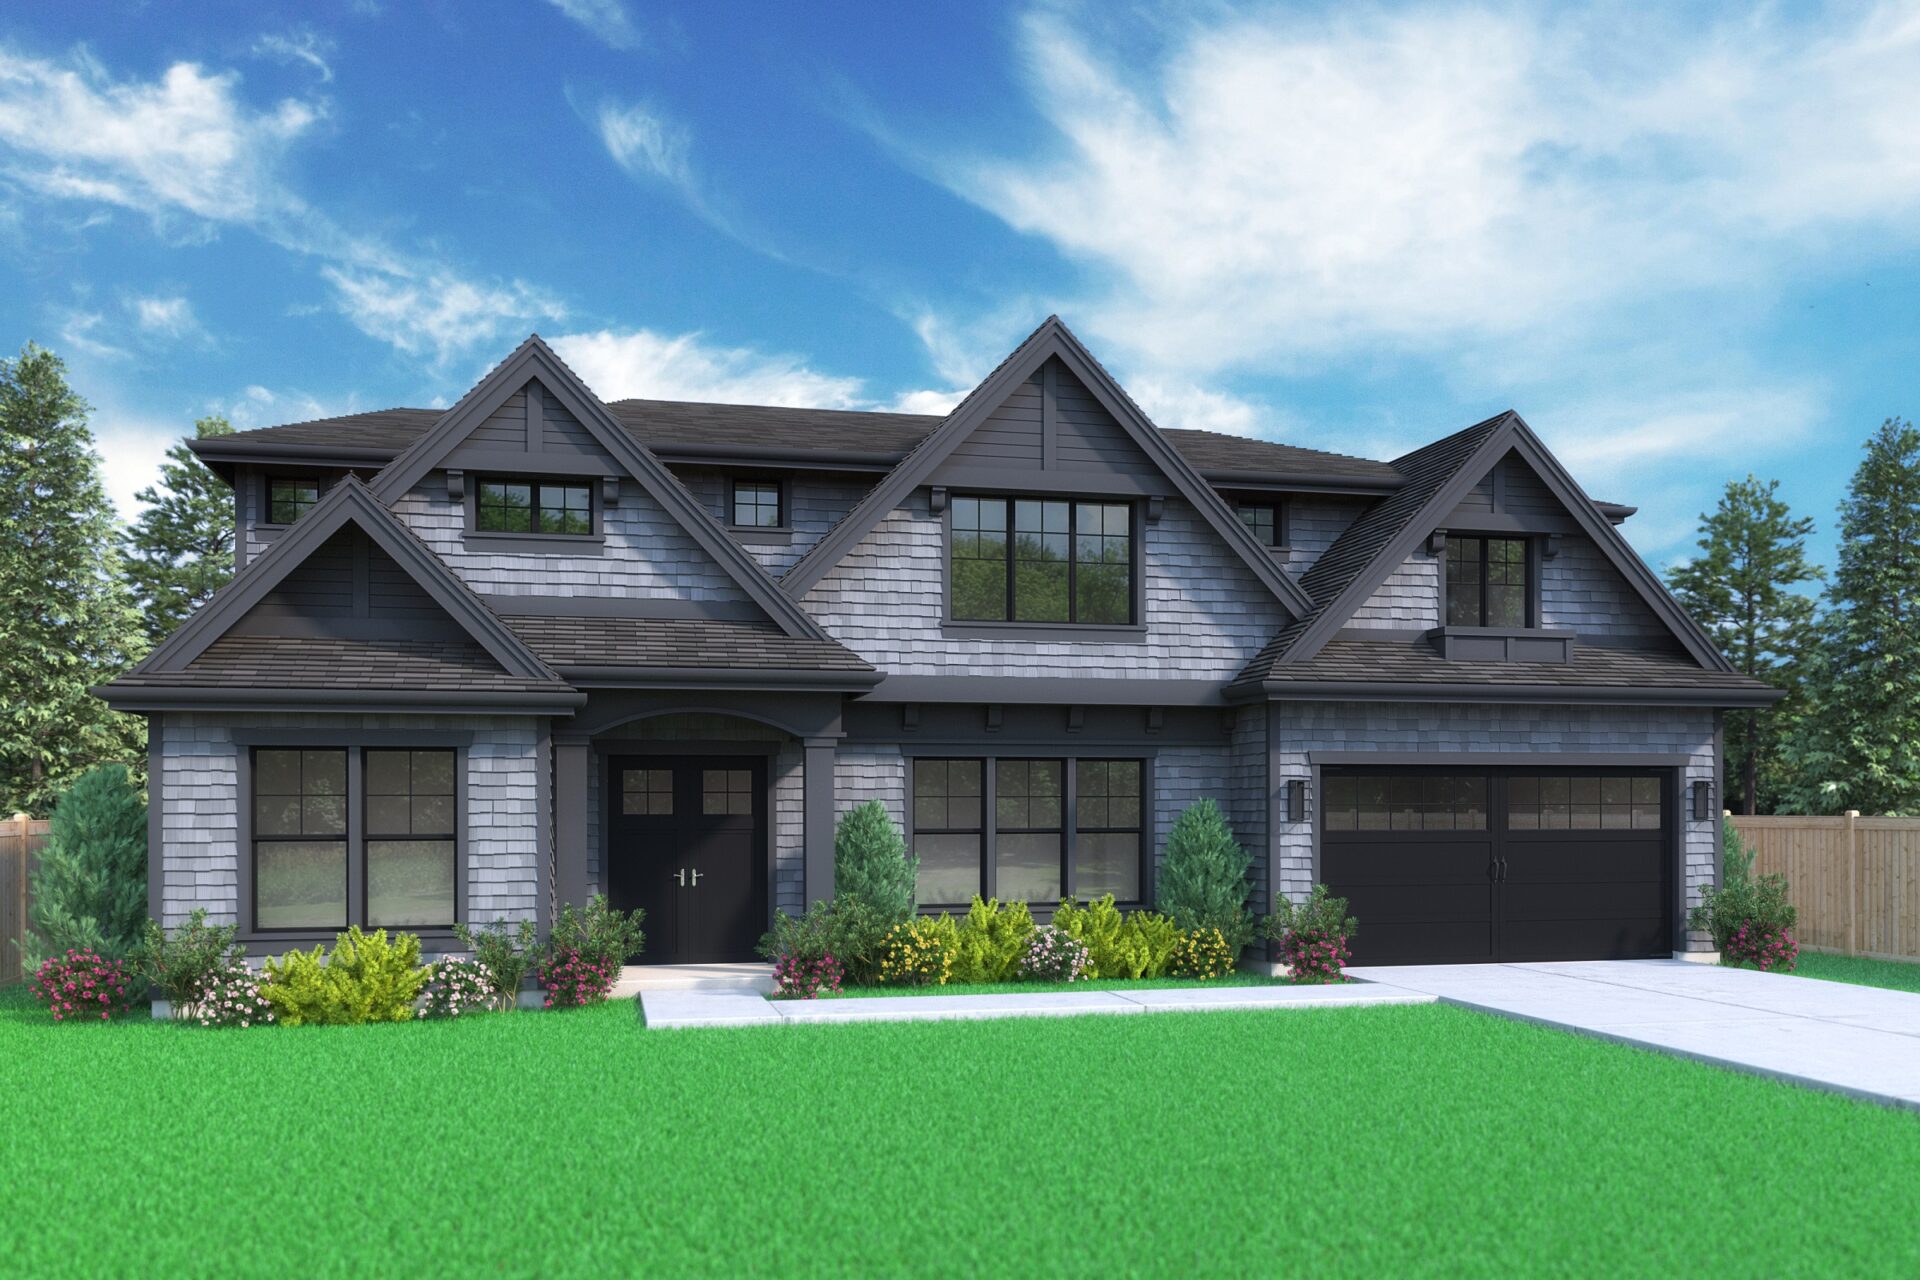 View our new luxury home construction on 12119 NE 64th St, in Kirkland, WA from MN Custom Home